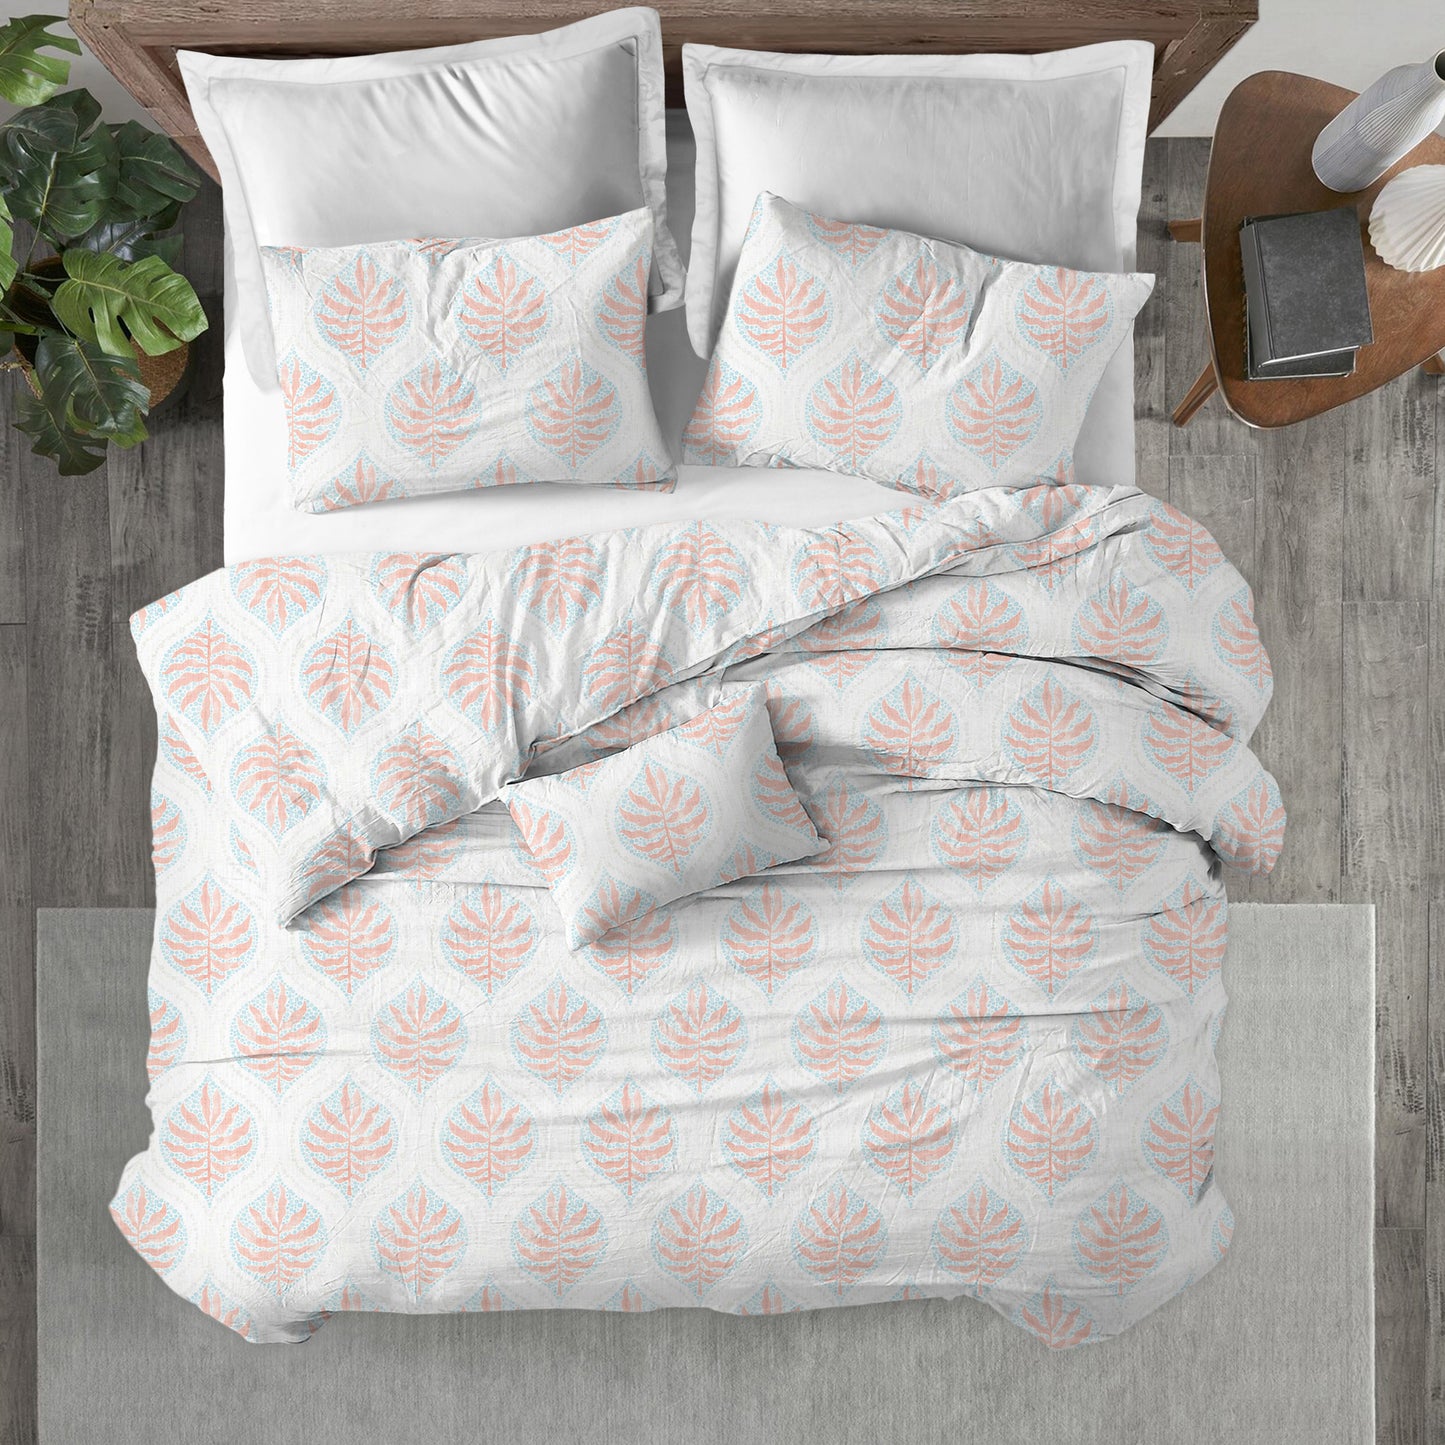 Duvet Cover in Airlie Coral Ogee Floral Watercolor - with Blue, Gray